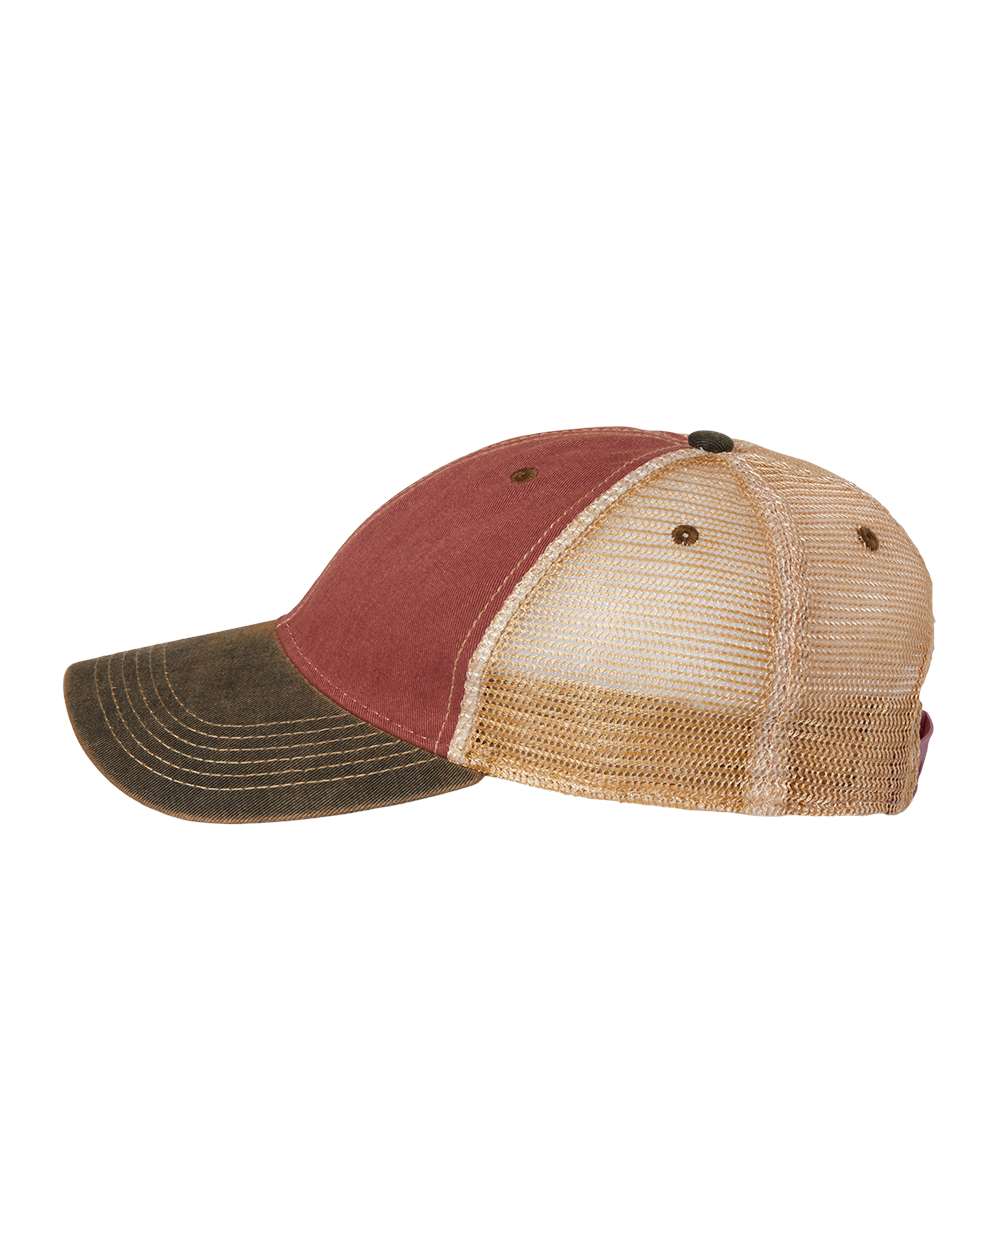 Side view of LEGACY OFA custom hat in cardinal, black and khaki